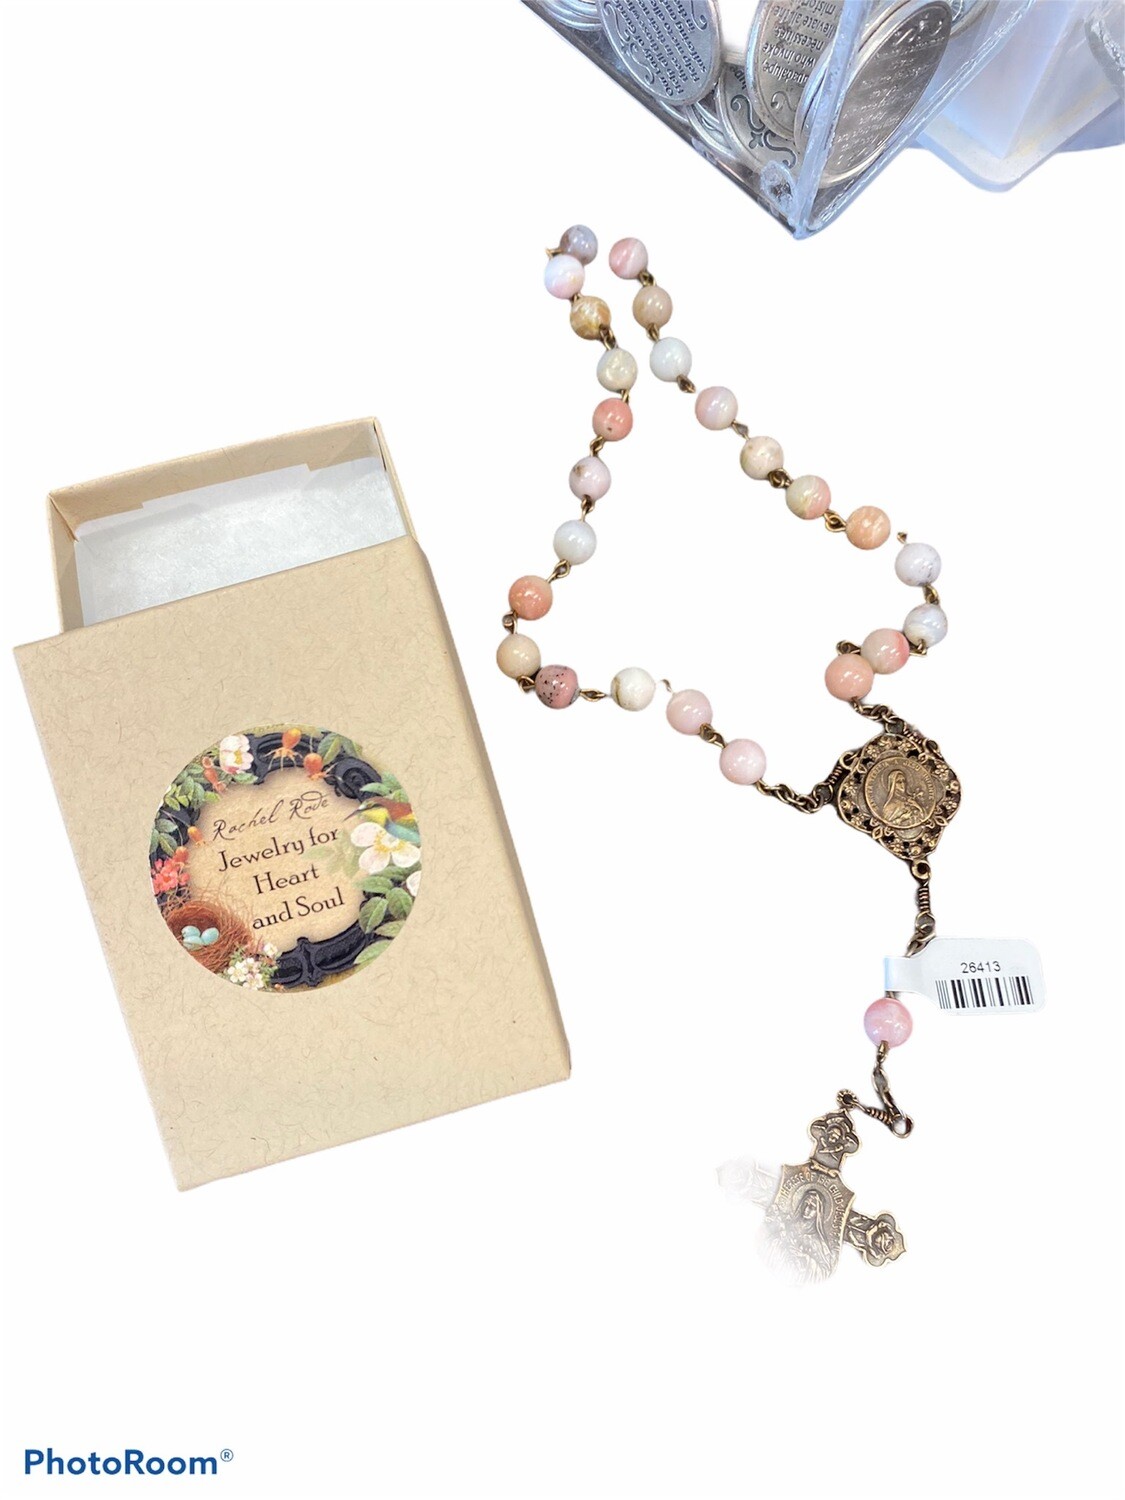 St. Therese Pink Opal Chaplet By Rachel Rove